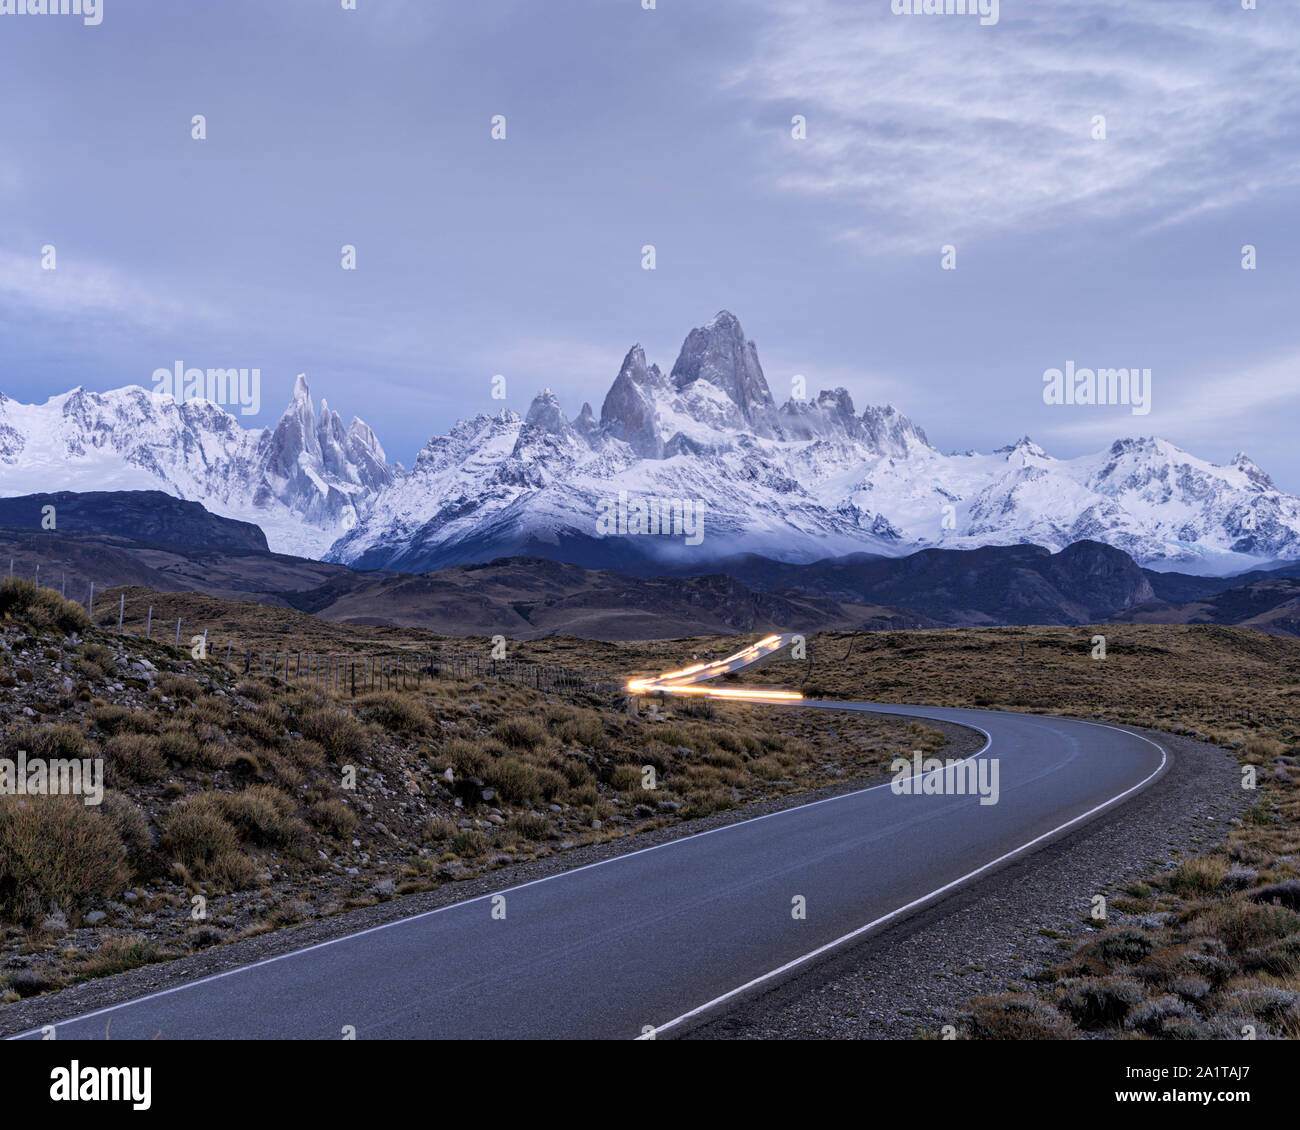 The road to el chalten with car light trails on the road and mount fitzroy and cerro torre in the background Stock Photo